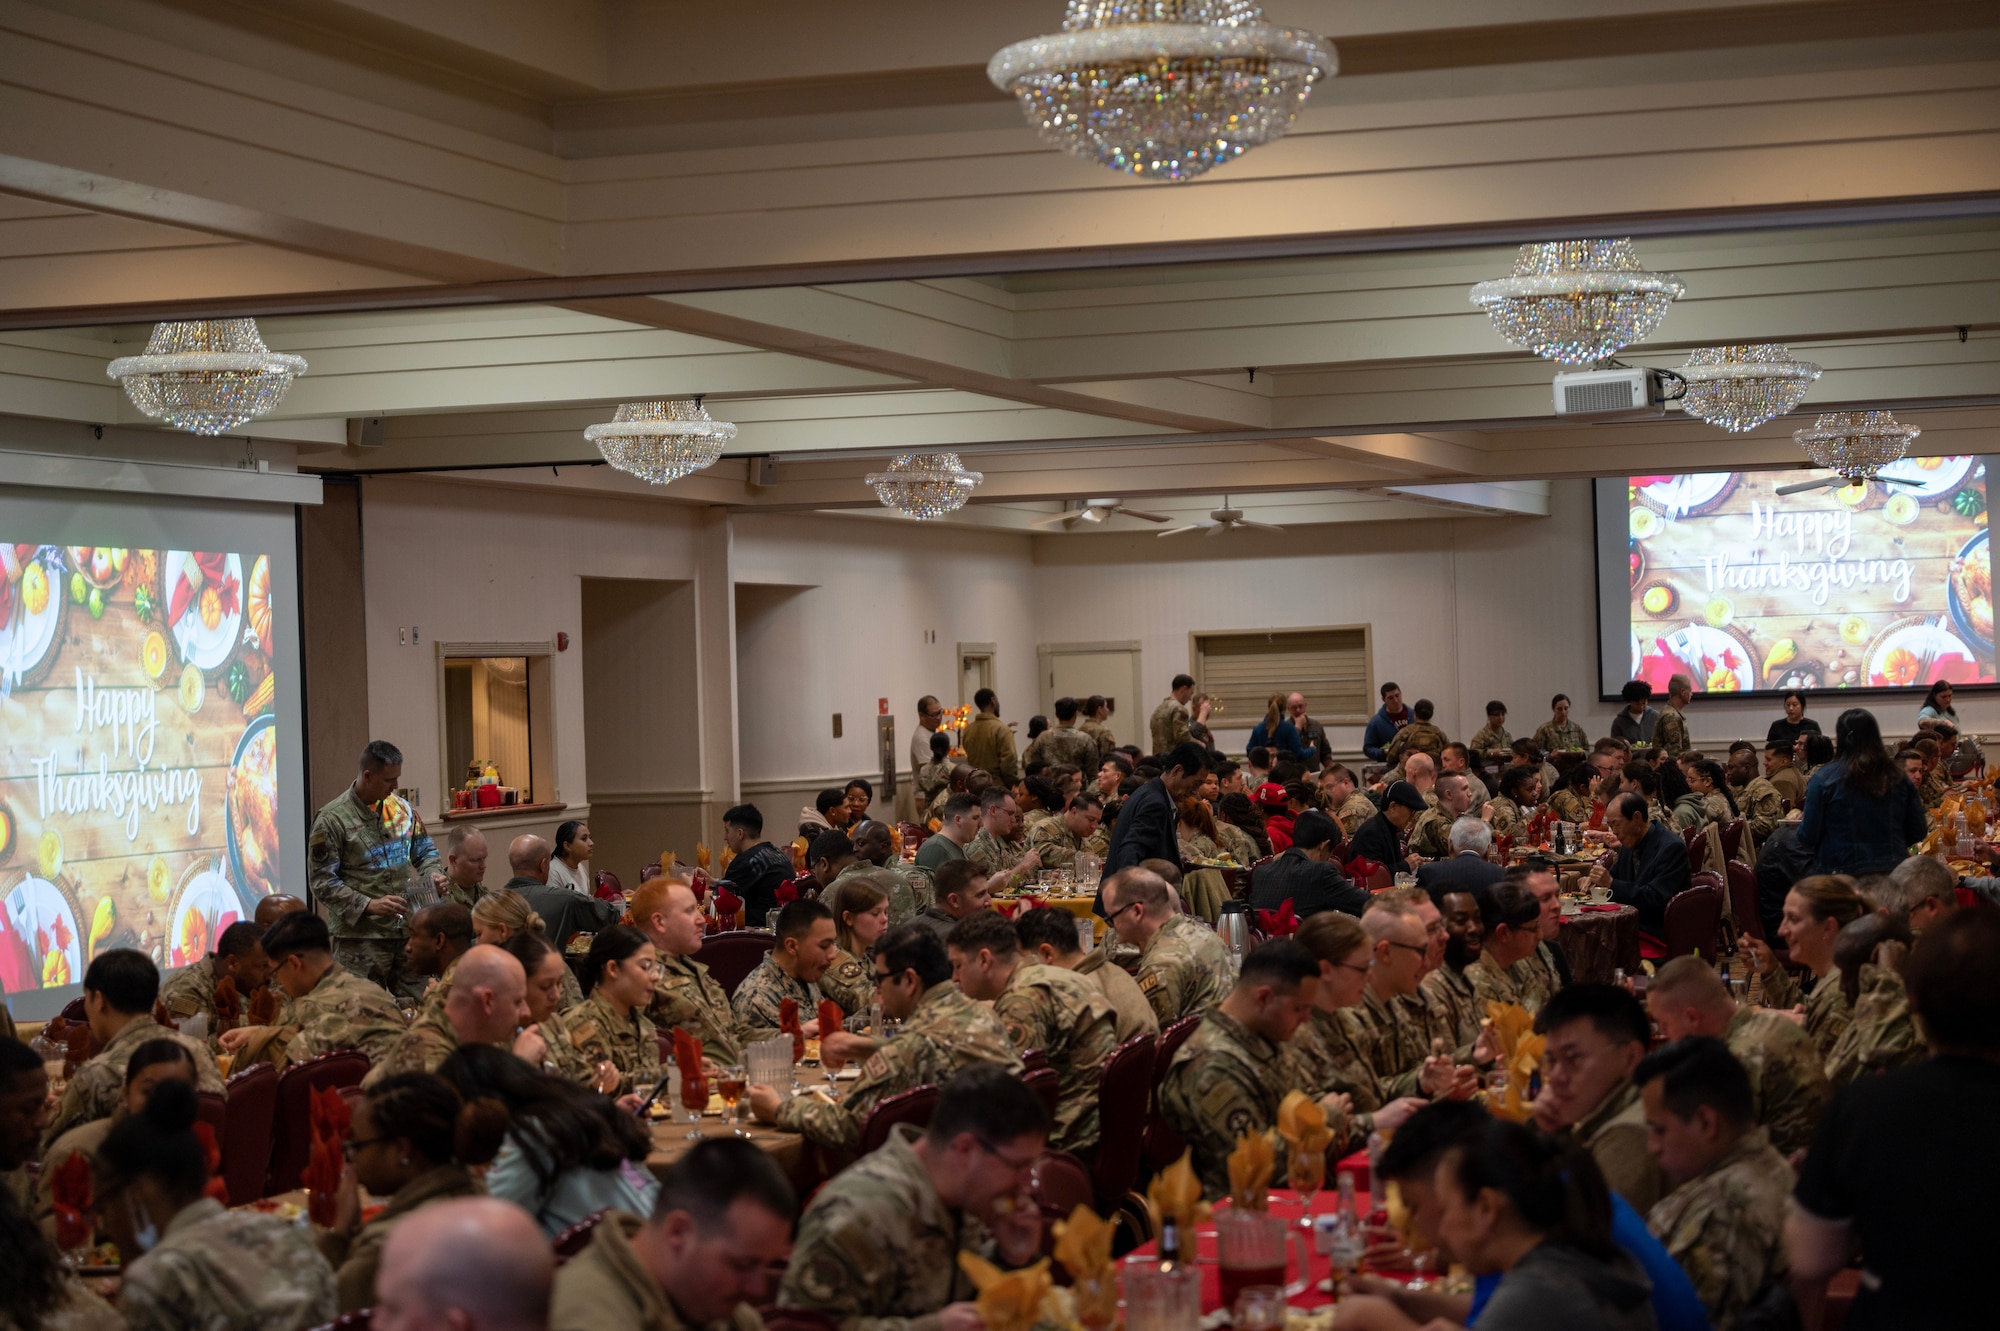 U.S. service members assigned to Kunsan Air Base, Republic of Korea, dine during the annual Thanksgiving meal hosted by the Korean-American Gunsan Alliance.